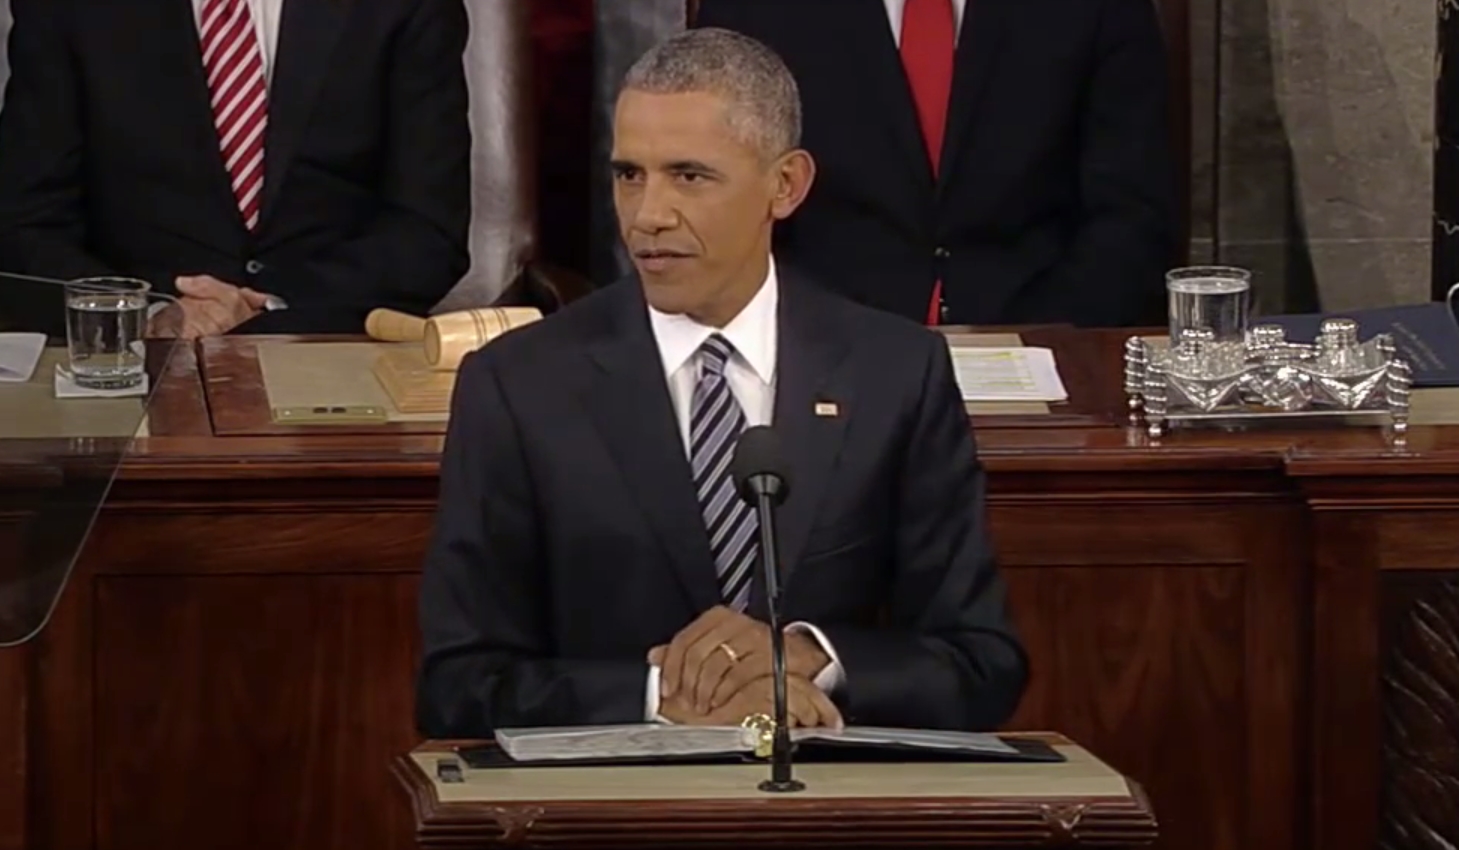 Obama state of the union 2016